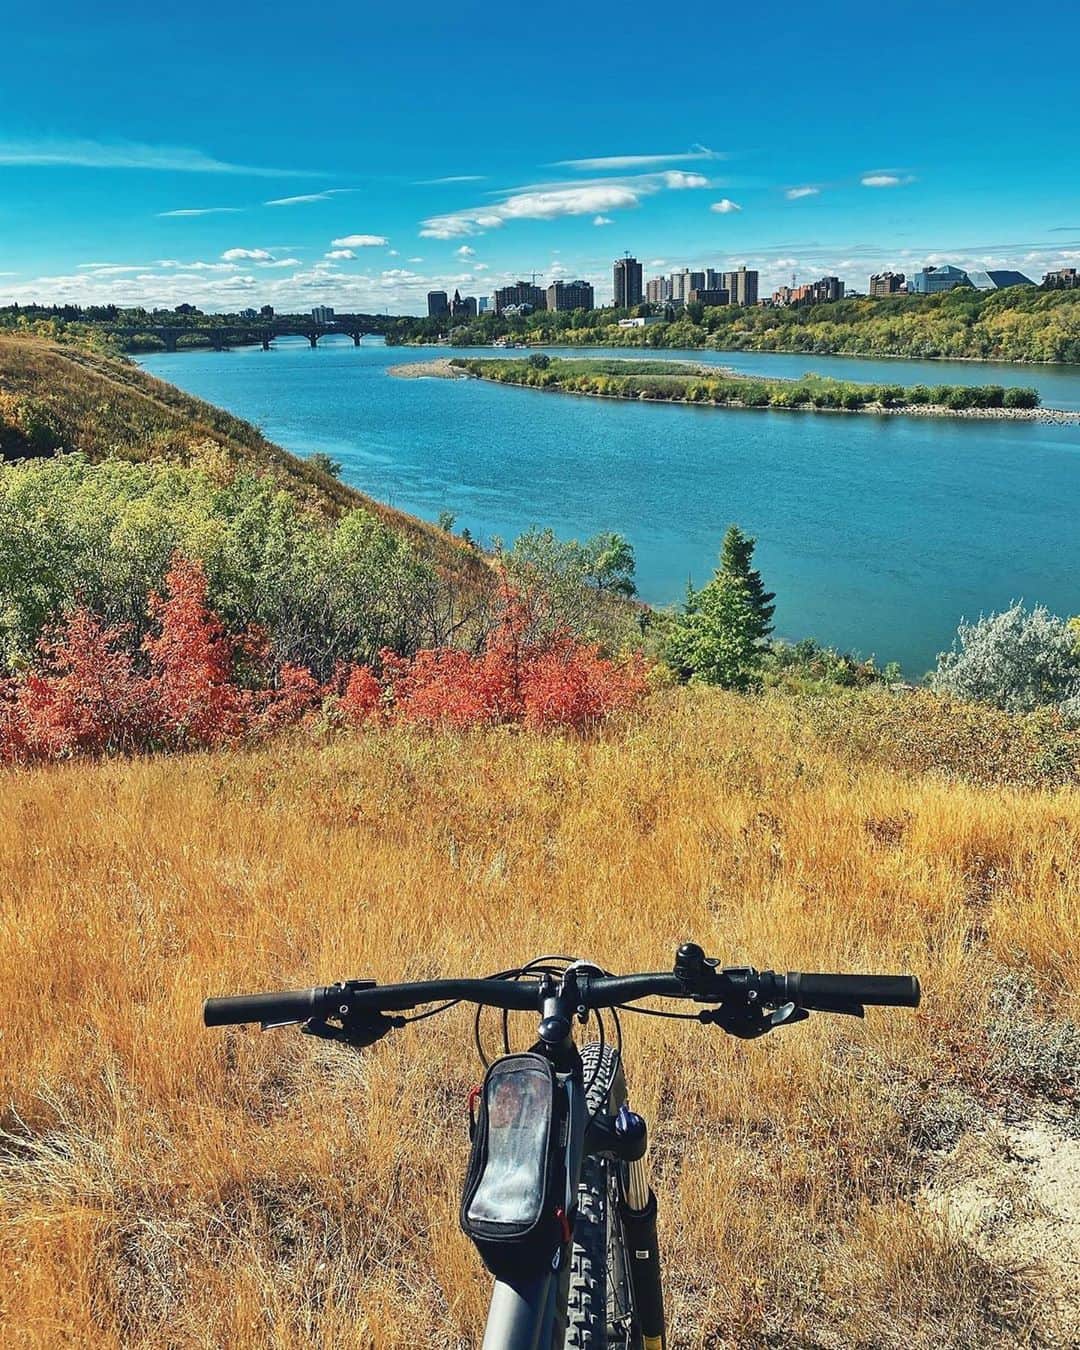 Explore Canadaさんのインスタグラム写真 - (Explore CanadaInstagram)「Today’s #CanadaSpotlight is on… bike rides in Canada!⁠⠀ ⁠⠀ As the weather begins to cool and the leaves turn vibrant shades of red and orange, now is a great time to hop on your bike and explore your local area. Here are just a few of our favourite places in Canada to get outside and enjoy the view:⁠⠀ ⁠⠀ 🚲 Take in Montreal (@montreal) via the green laneways with @spadeandpalacio’s 4-hour guided tour, taking you from Mount Royal Park through iconic neighbourhoods to discover the city’s thriving art scene.⁠⠀ 🍁If you’re looking to work on your mountain biking skills, Saskatoon (@visitsaskatoon) is home to an incredible trail network overlooking the city. Head to Cranberry Flats or Sutherland Beach for some beginner-friendly routes, or if you’re up for a challenge, try Diefenbaker Park, Silverwood and East Riverbank. ⁠⠀ ☀️ New Brunswick’s (@destinationnb) Fundy Trail Parkway is a 30km (18.6 mile) rollercoaster full of ups, downs, twists and turns, but it’s worth the effort for the breathtaking views you’ll see along the way!⁠⠀ 🌲 Vancouver’s (@inside_vancouver) seawall is a great spot for a leisurely cycle. Head to Stanley Park for a perfect 10km (6 mile) stretch of path that circles the park, offering spectacular views of the Lionsgate Bridge and the iconic mountains on the North Shore. ⁠⠀ 🍷 Discover Ontario’s (@ontariotravel) Wine Trail by bike! Fall in love with Canada’s southernmost region as you roll through scenic countryside sampling world-class wines. ⁠⠀ ⁠⠀ *Know before you go! Check the most up-to-date travel restrictions and border closures before planning your trip.*⁠⠀ ⁠⠀ 📷: ⁠⠀ ⁠⠀ 1.  @spadeandpalacio⁠⠀ 2. @monchitoy⁠⠀ 3. @sammlawrie⁠⠀ 4. @sophieroamer⁠⠀ 5. @hollclaeys⁠⠀ ⁠⠀ 📍: ⁠⠀ ⁠⠀ 1.  @montreal⁠⠀ 2.  @visitsaskatoon⁠⠀ 3.  @destinationnb⁠⠀ 4.  @inside_vancouver⁠⠀ 5.  @ontariotravel⁠⠀ ⁠⠀ #MTLmoments #Saskatooning #ExploreNB #VeryVancouver #DiscoverON⁠⠀」9月25日 0時41分 - explorecanada